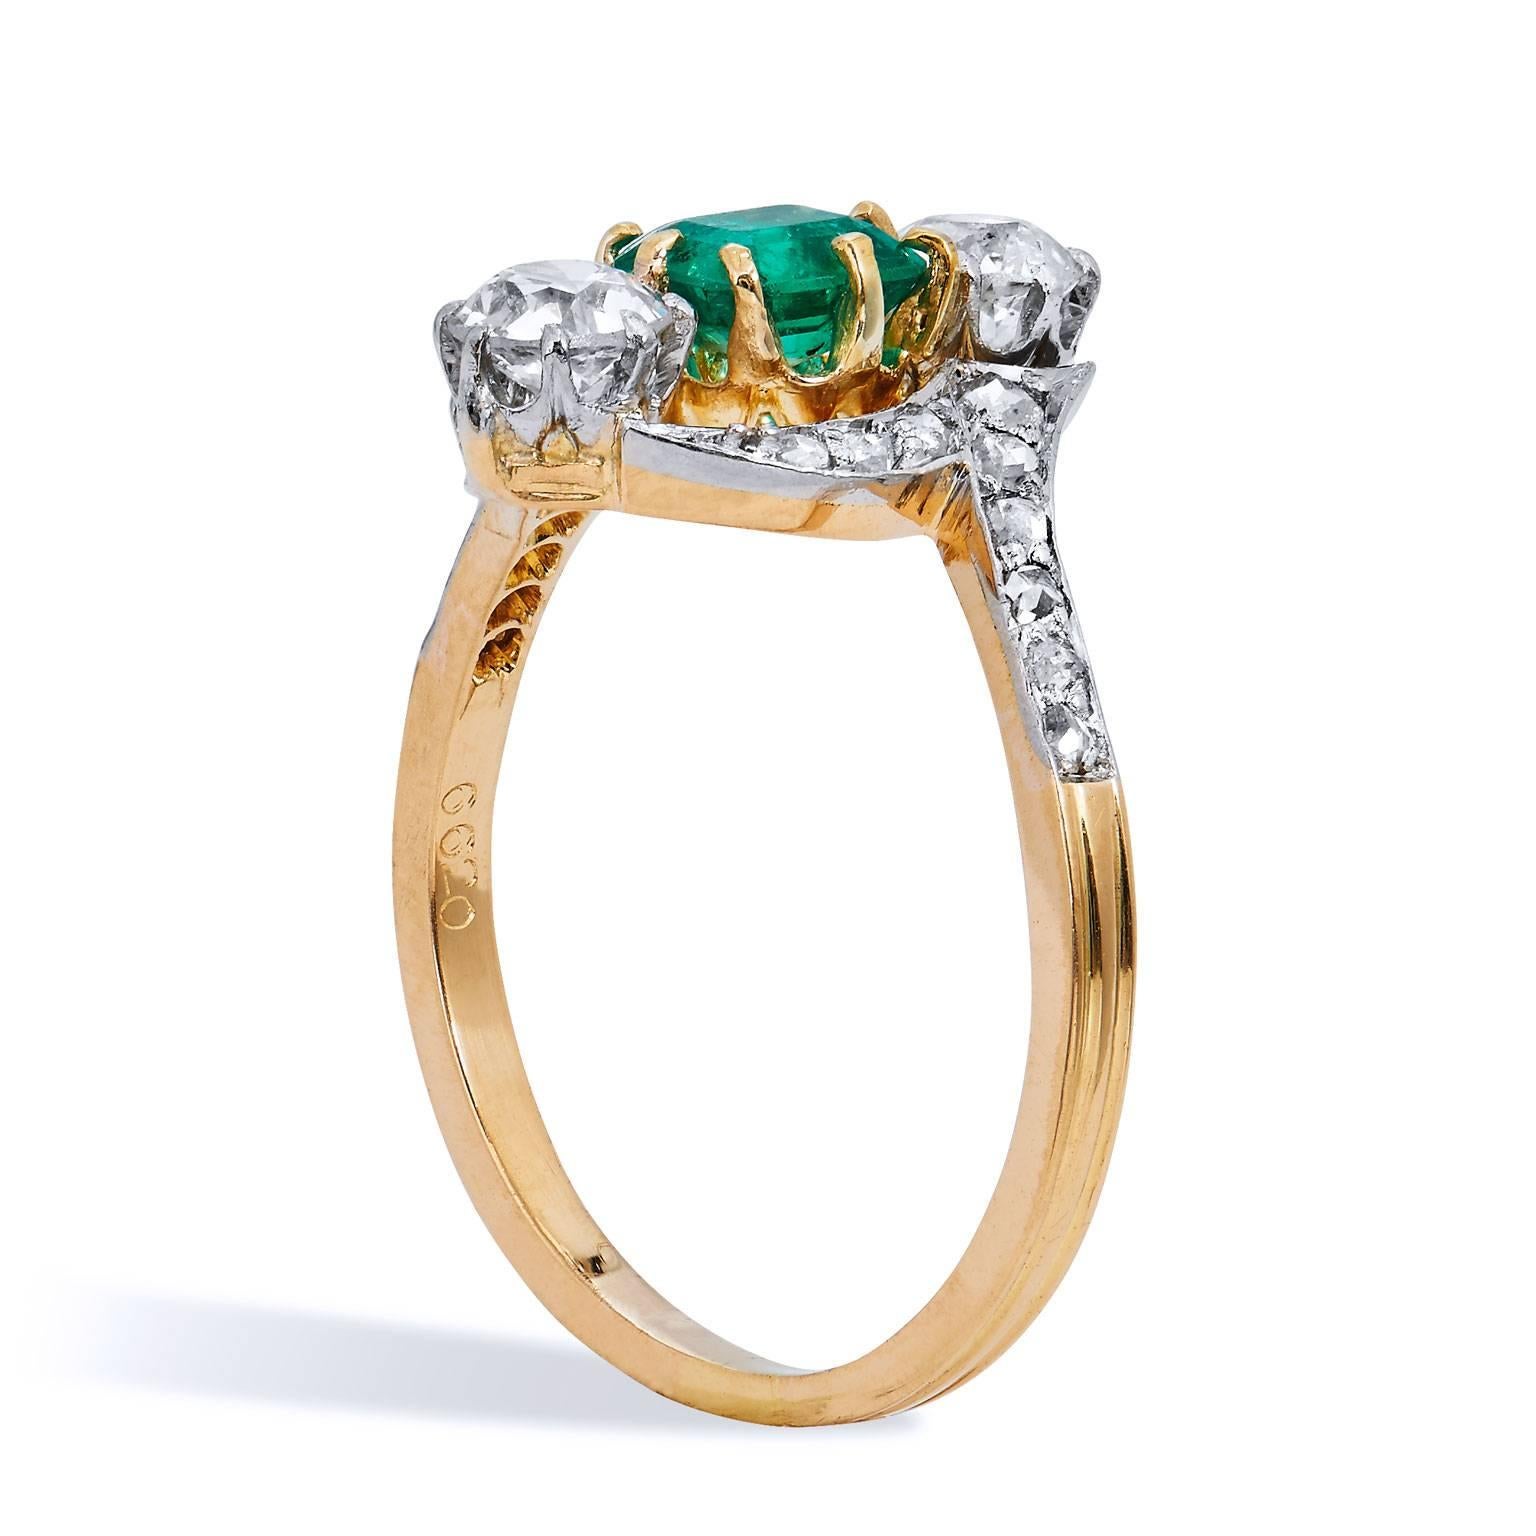 Art Deco Estate Emerald Diamond 3 Stone with Pave Gold Platinum Bypass Ring

This beautiful and elegant ring was made with excellent craftsmanship of the old world.
The top of the ring is created in platinum which make the diamonds and emeralds pop